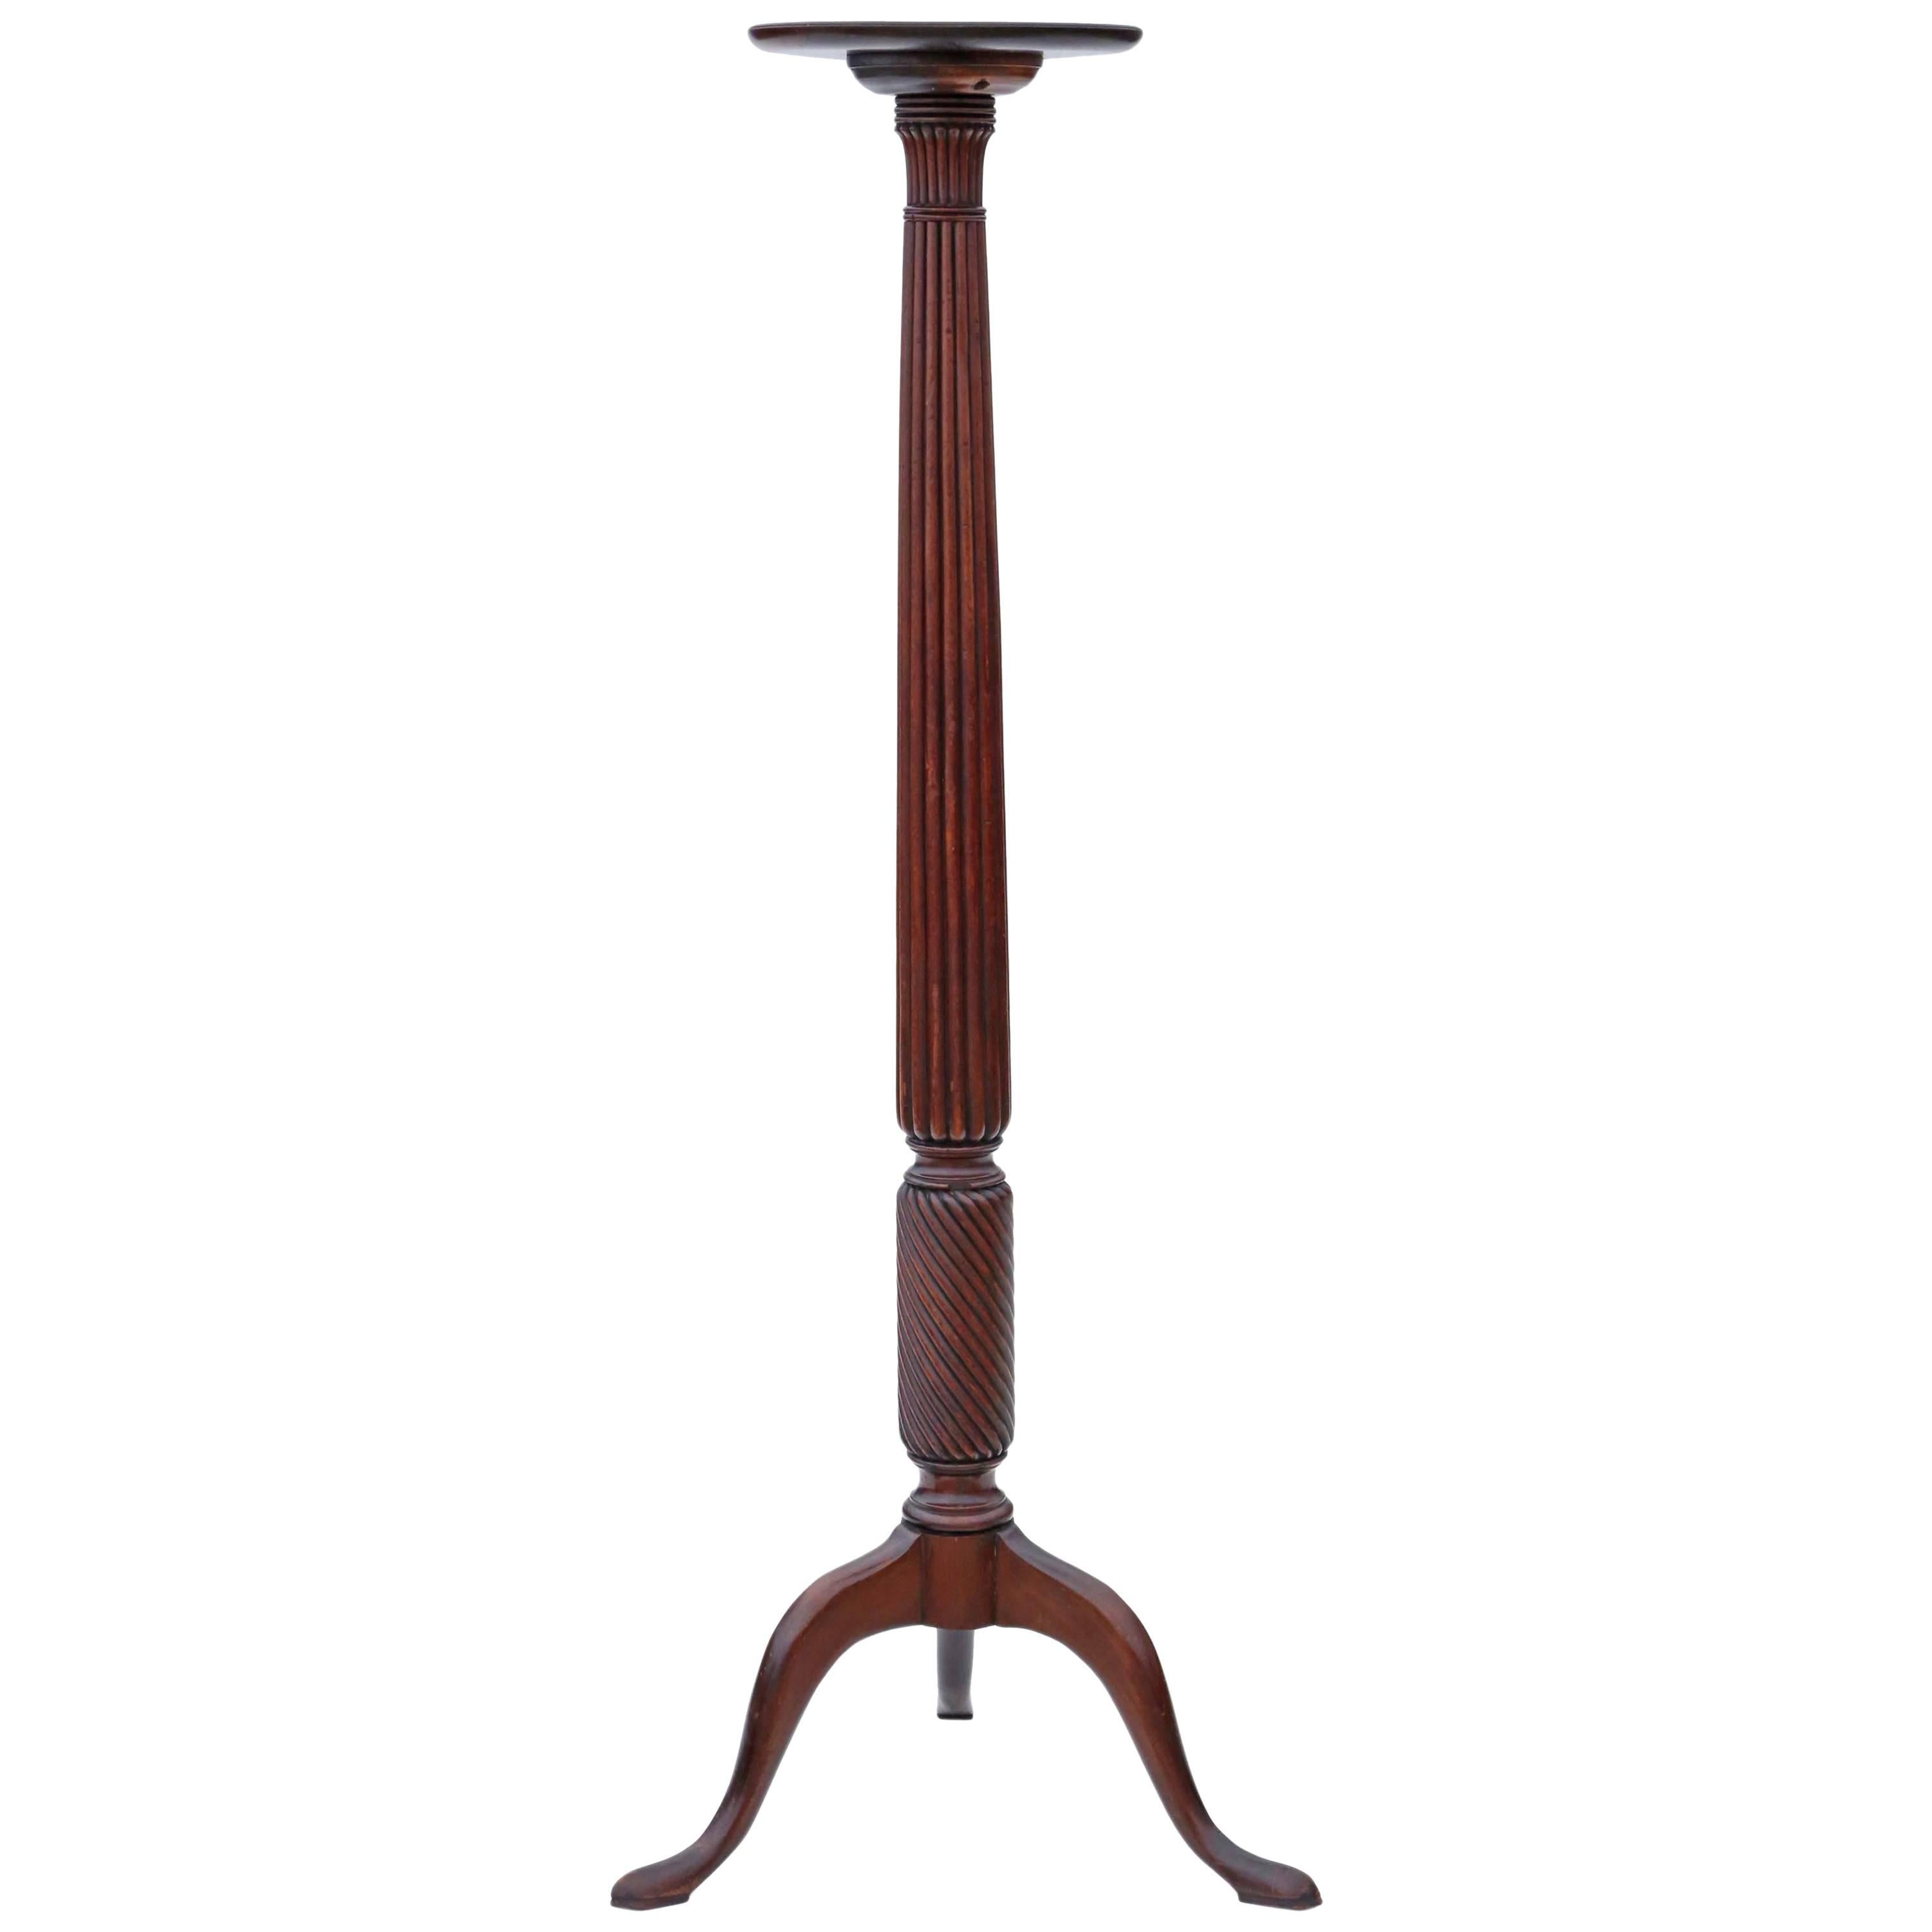 Antique Quality 19th Century Mahogany Torchiere Pedestal Plant Stand For Sale